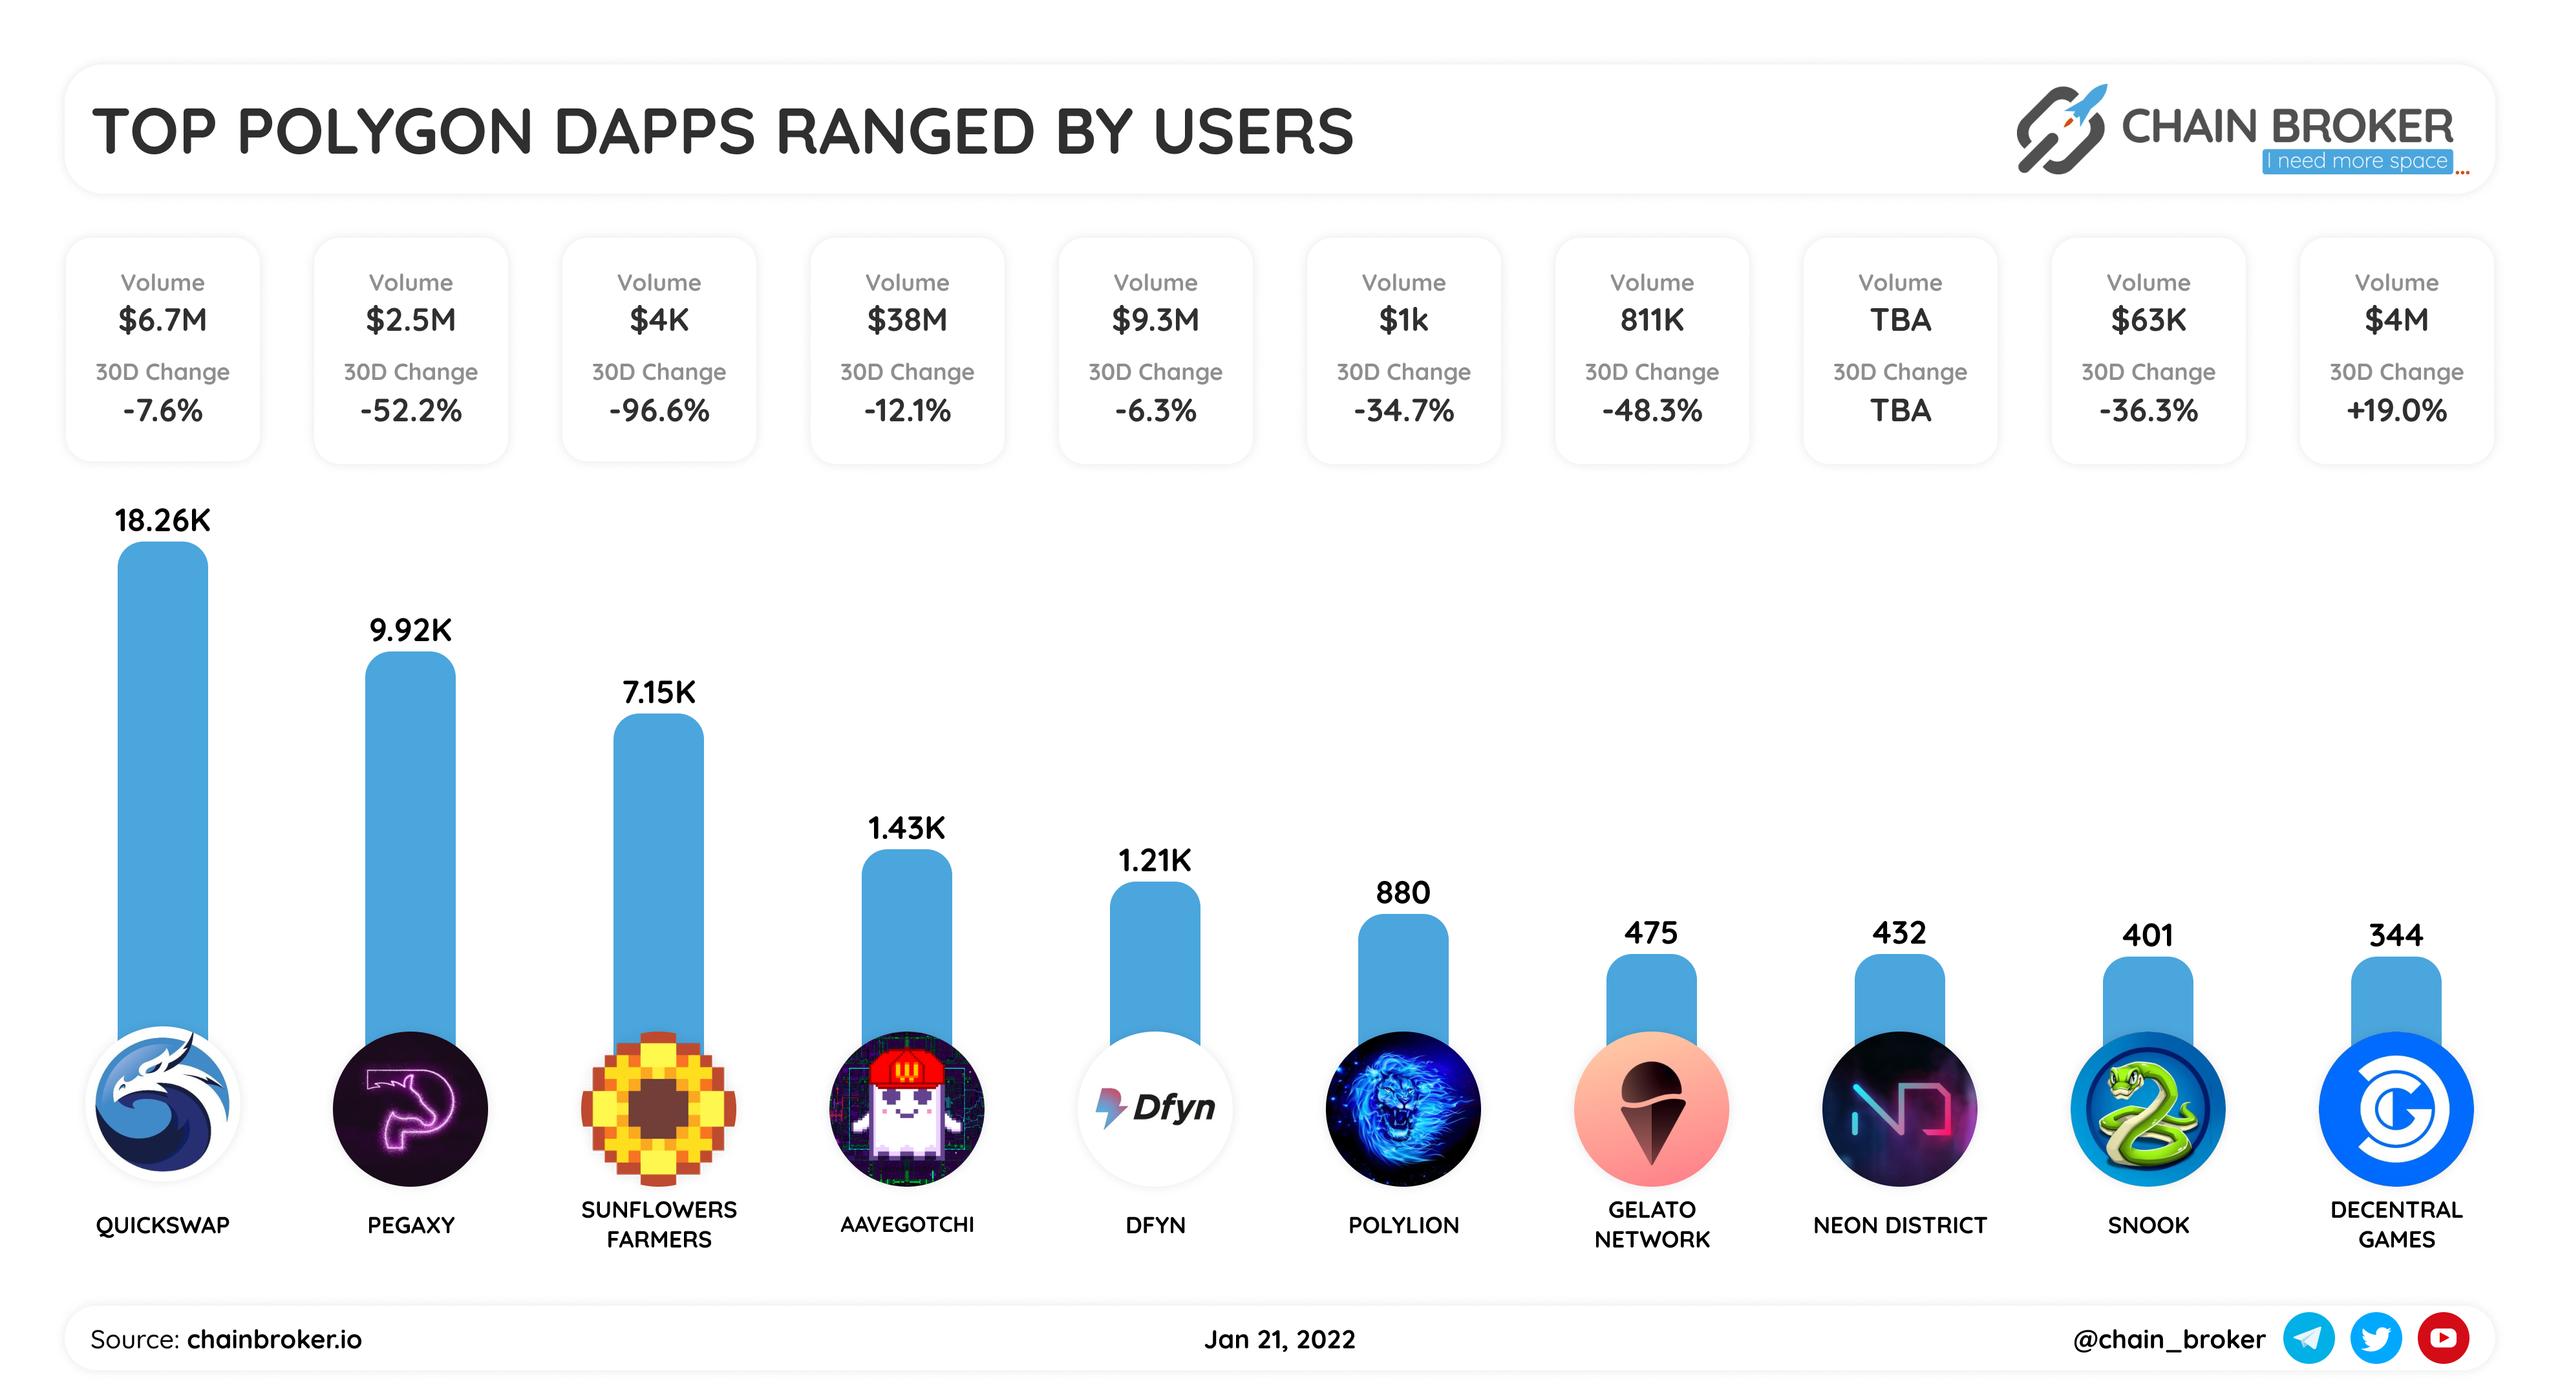 Top Polygon dapps ranged by users